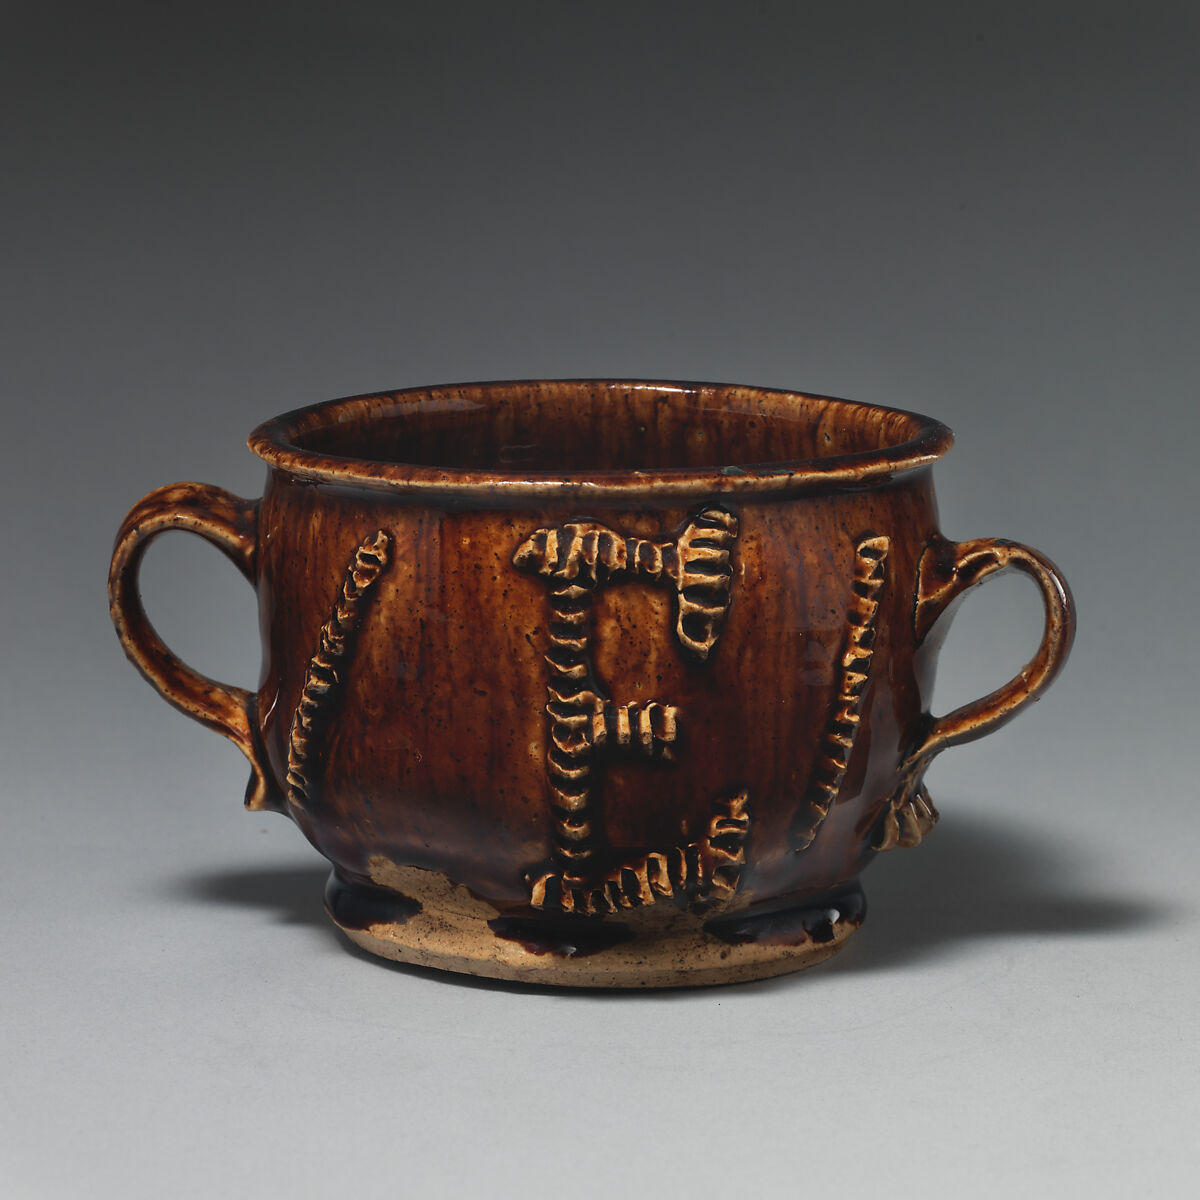 Two-handled cup, Glazed pottery, brown splash, British, Staffordshire 